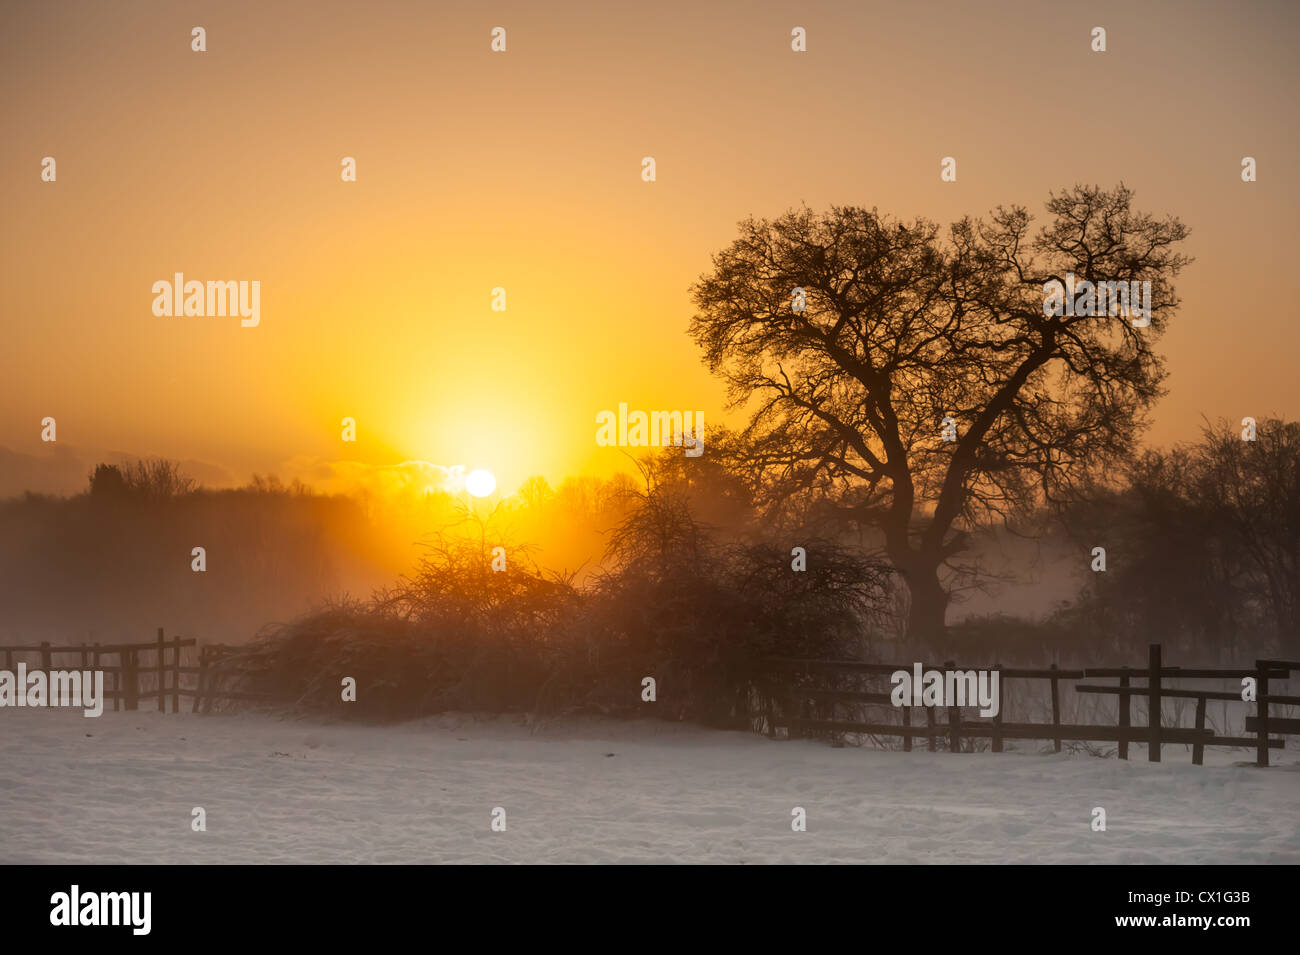 A_Winter_sunrise_over_a_snowy_misty_Brit